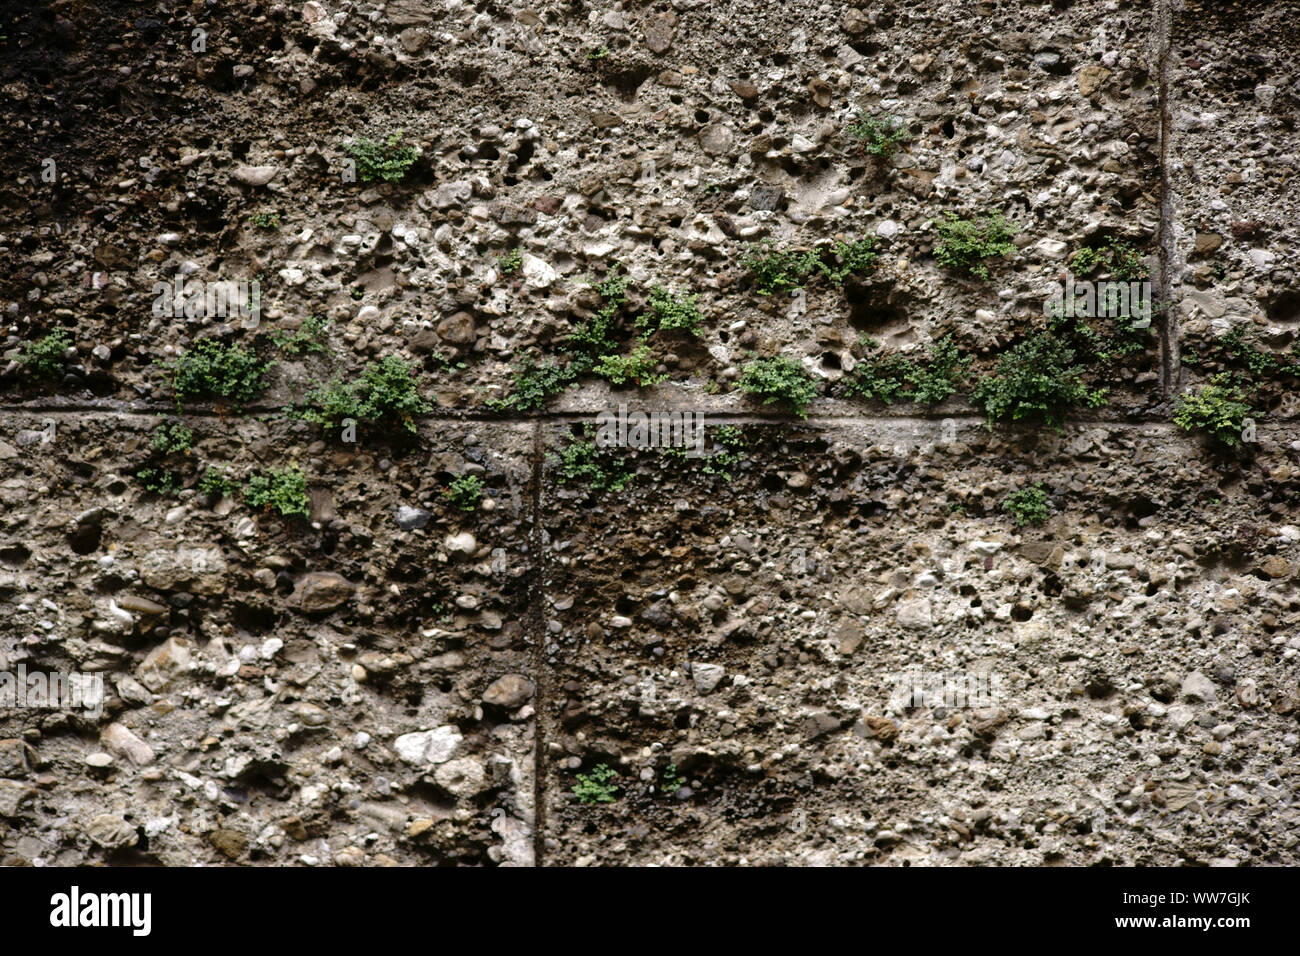 Close-up of a wall of porous old stones with plants in the cracks and pores, Stock Photo